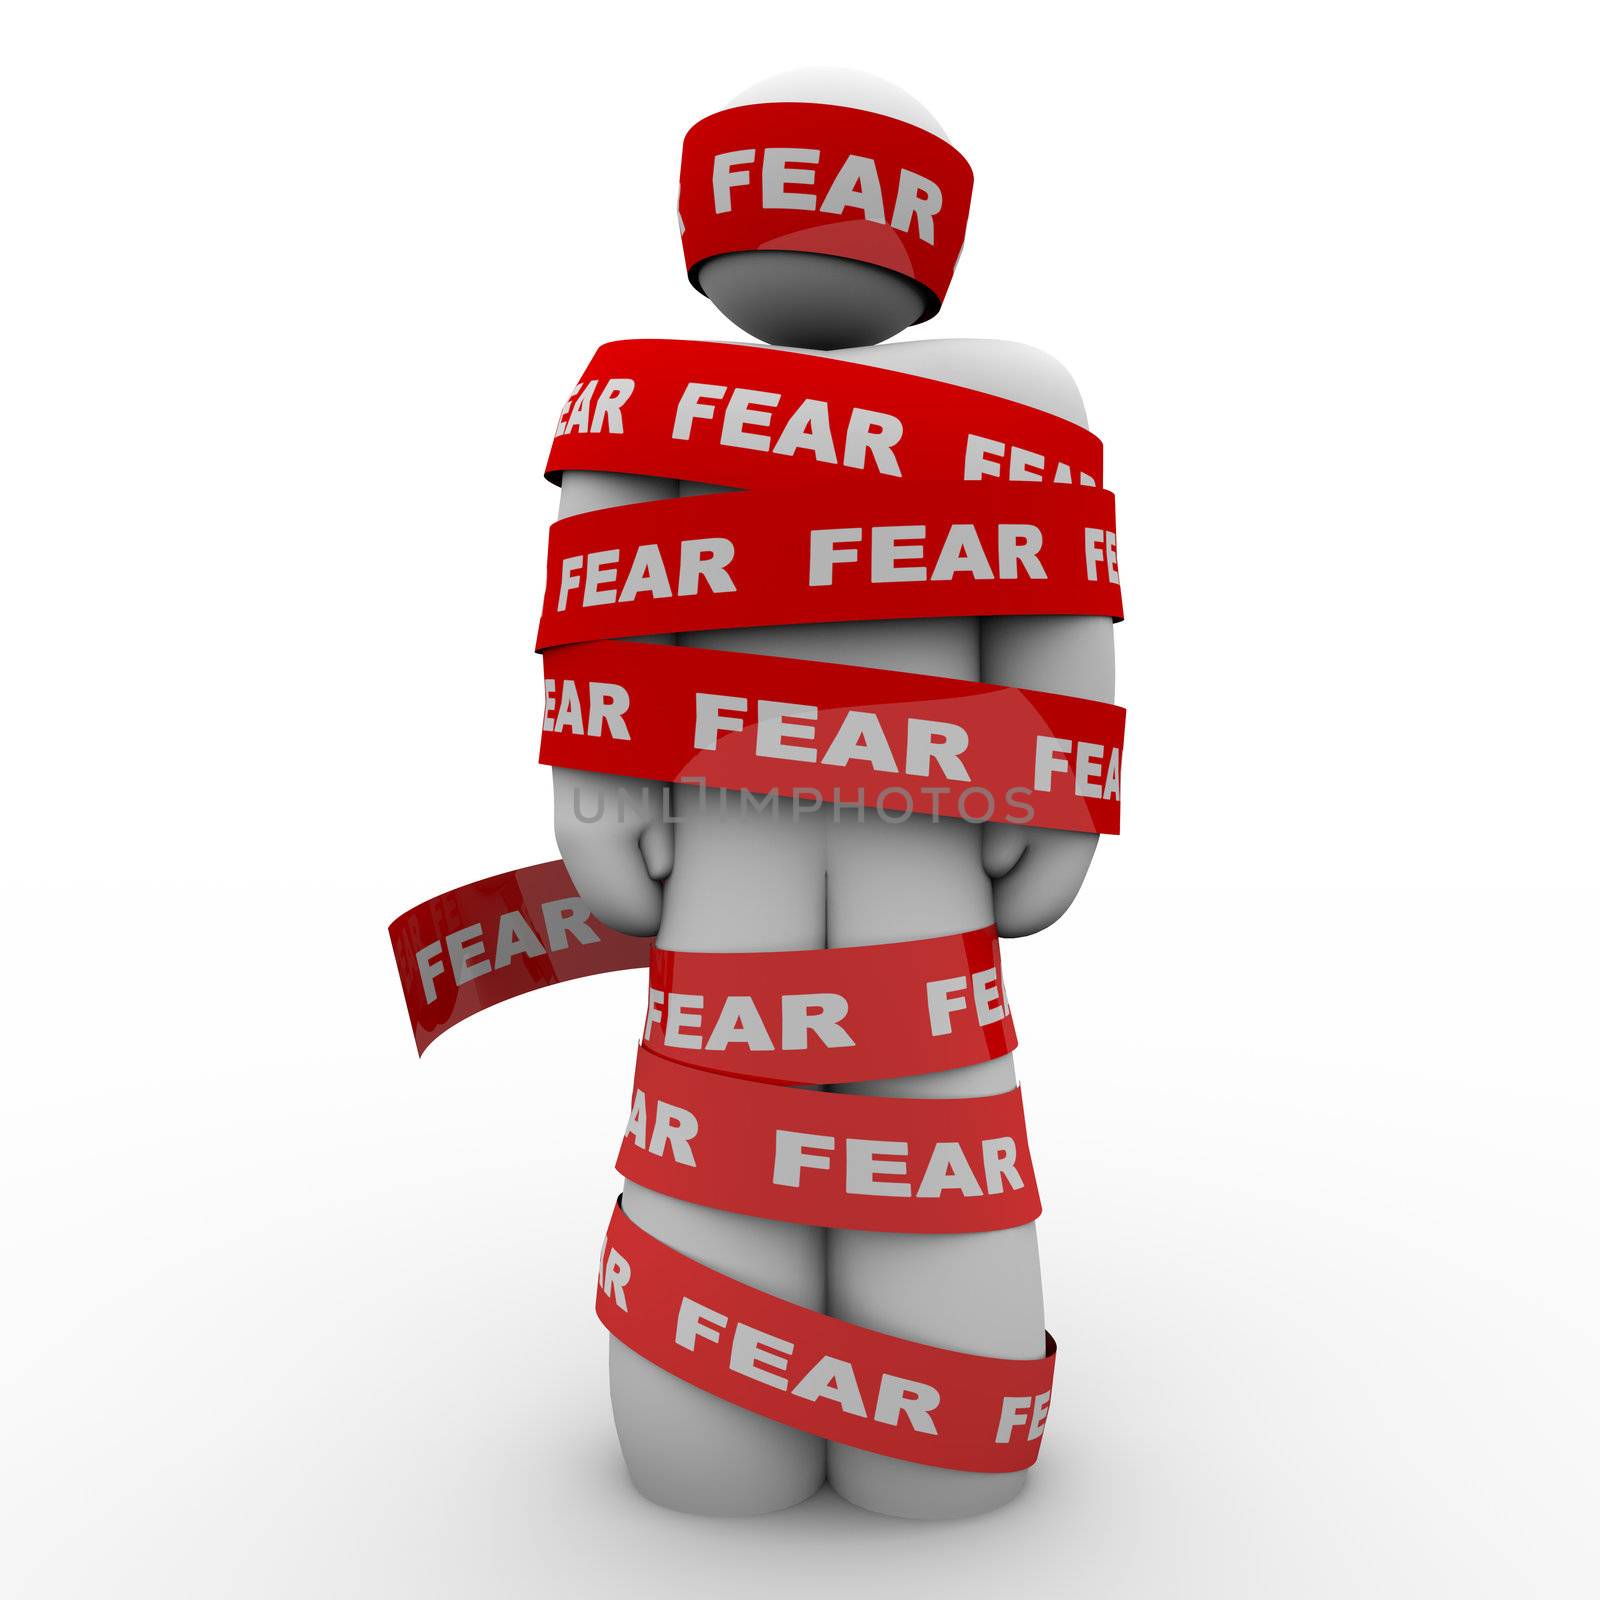 A man is wrapped in red tape reading fear representing the paralysis of being afraid and unable to move or act in the face of danger or something that scares or induces fright